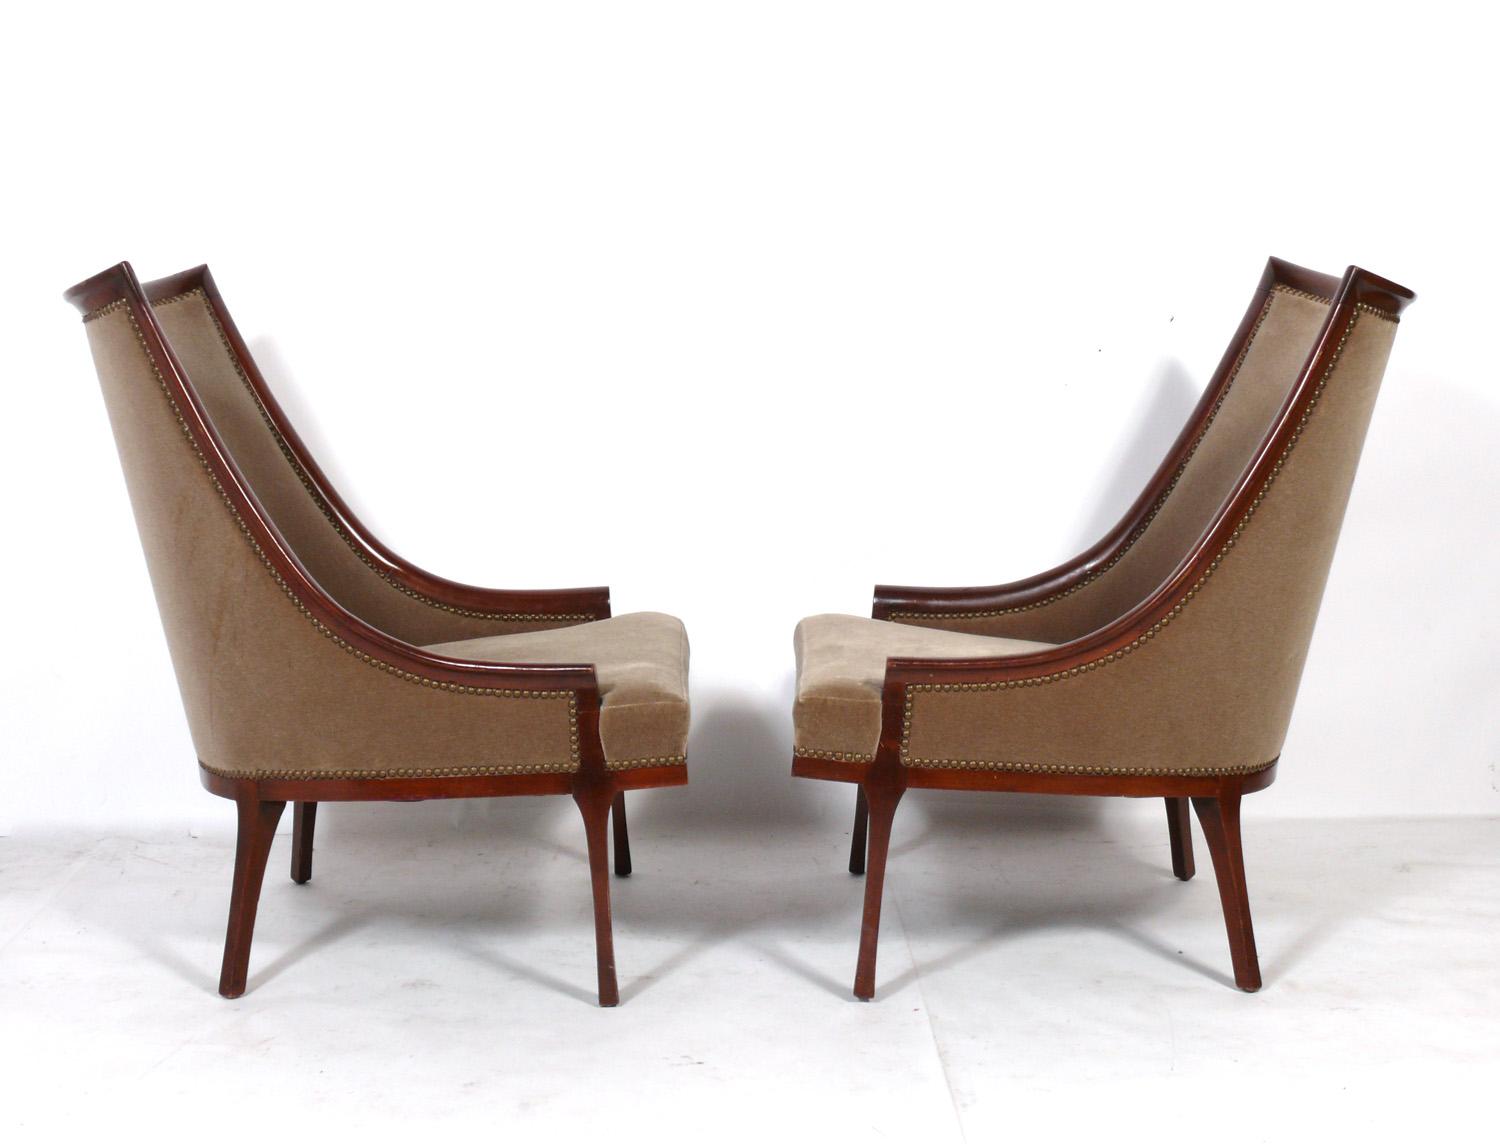 Pair of French Lounge or slipper chairs, France, circa 1960s. They are currently being refinished and reupholstered and can be completed in your choice of finish color and reupholstered in your fabric. Simply send us 8 yards of your fabric after